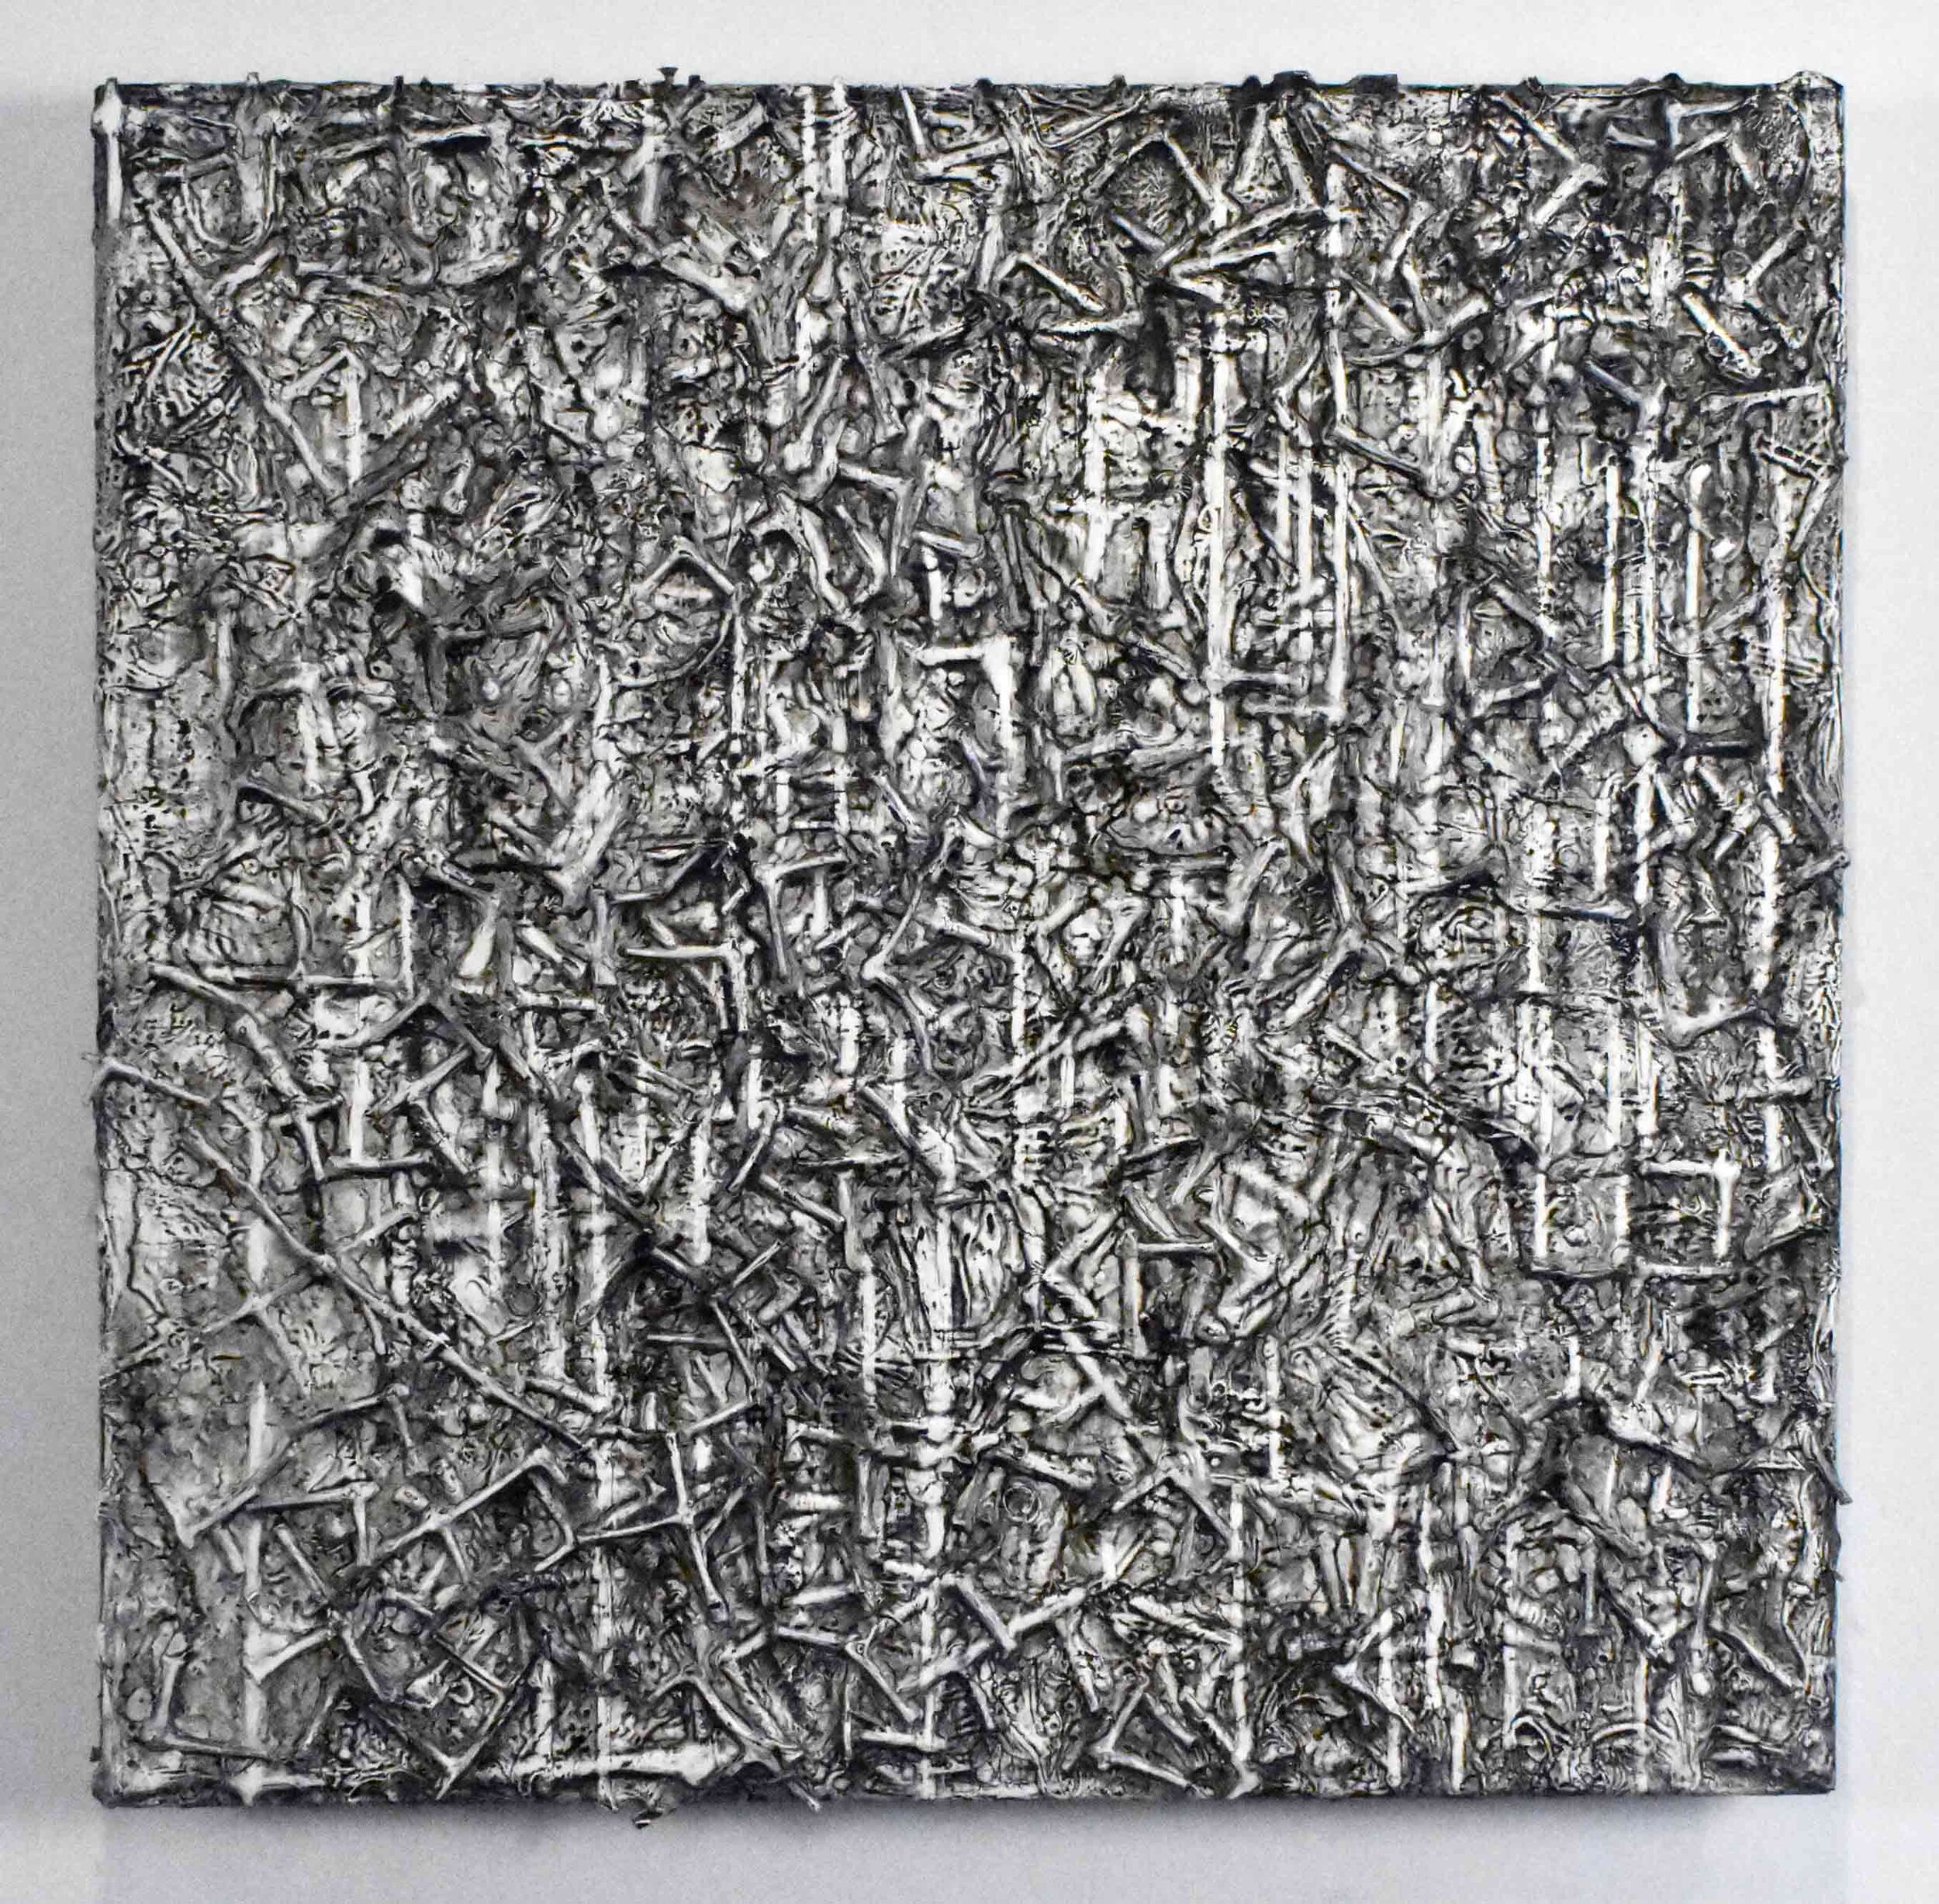   Disruption 1_Black and White   2020  wood, acrylic, clay  24 x 24” 